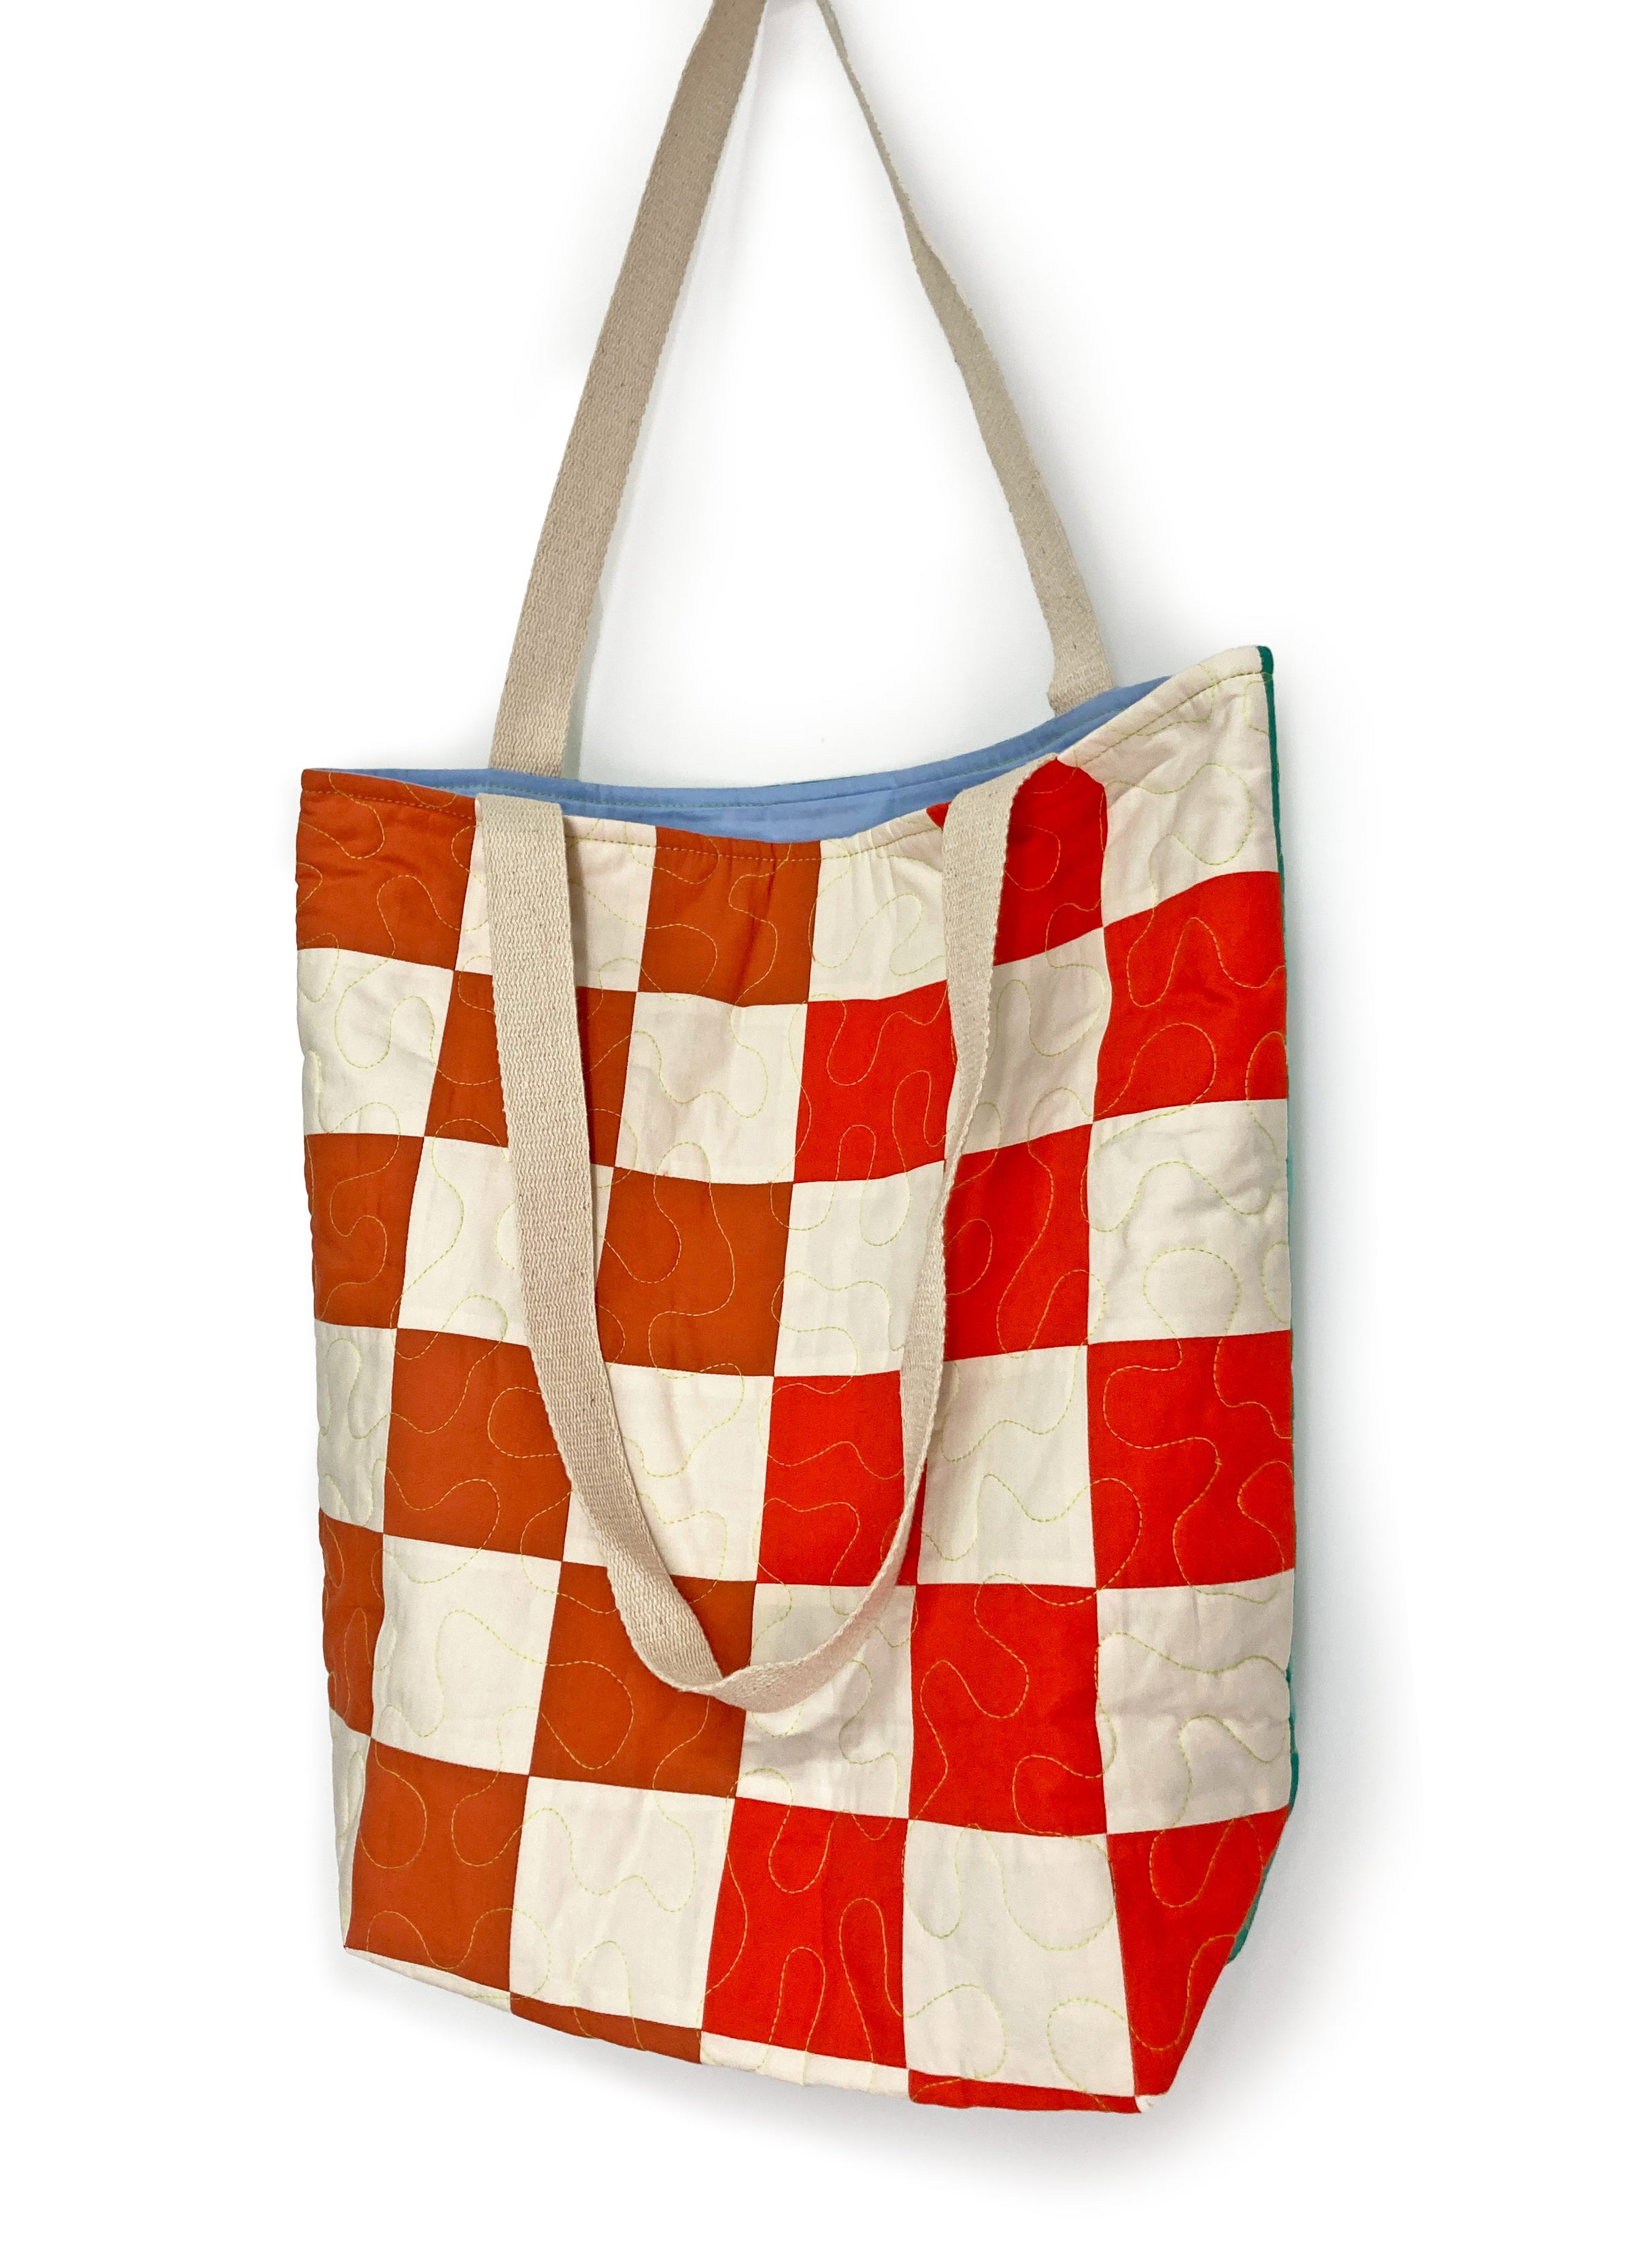 Picnic Quilted Tote Bag